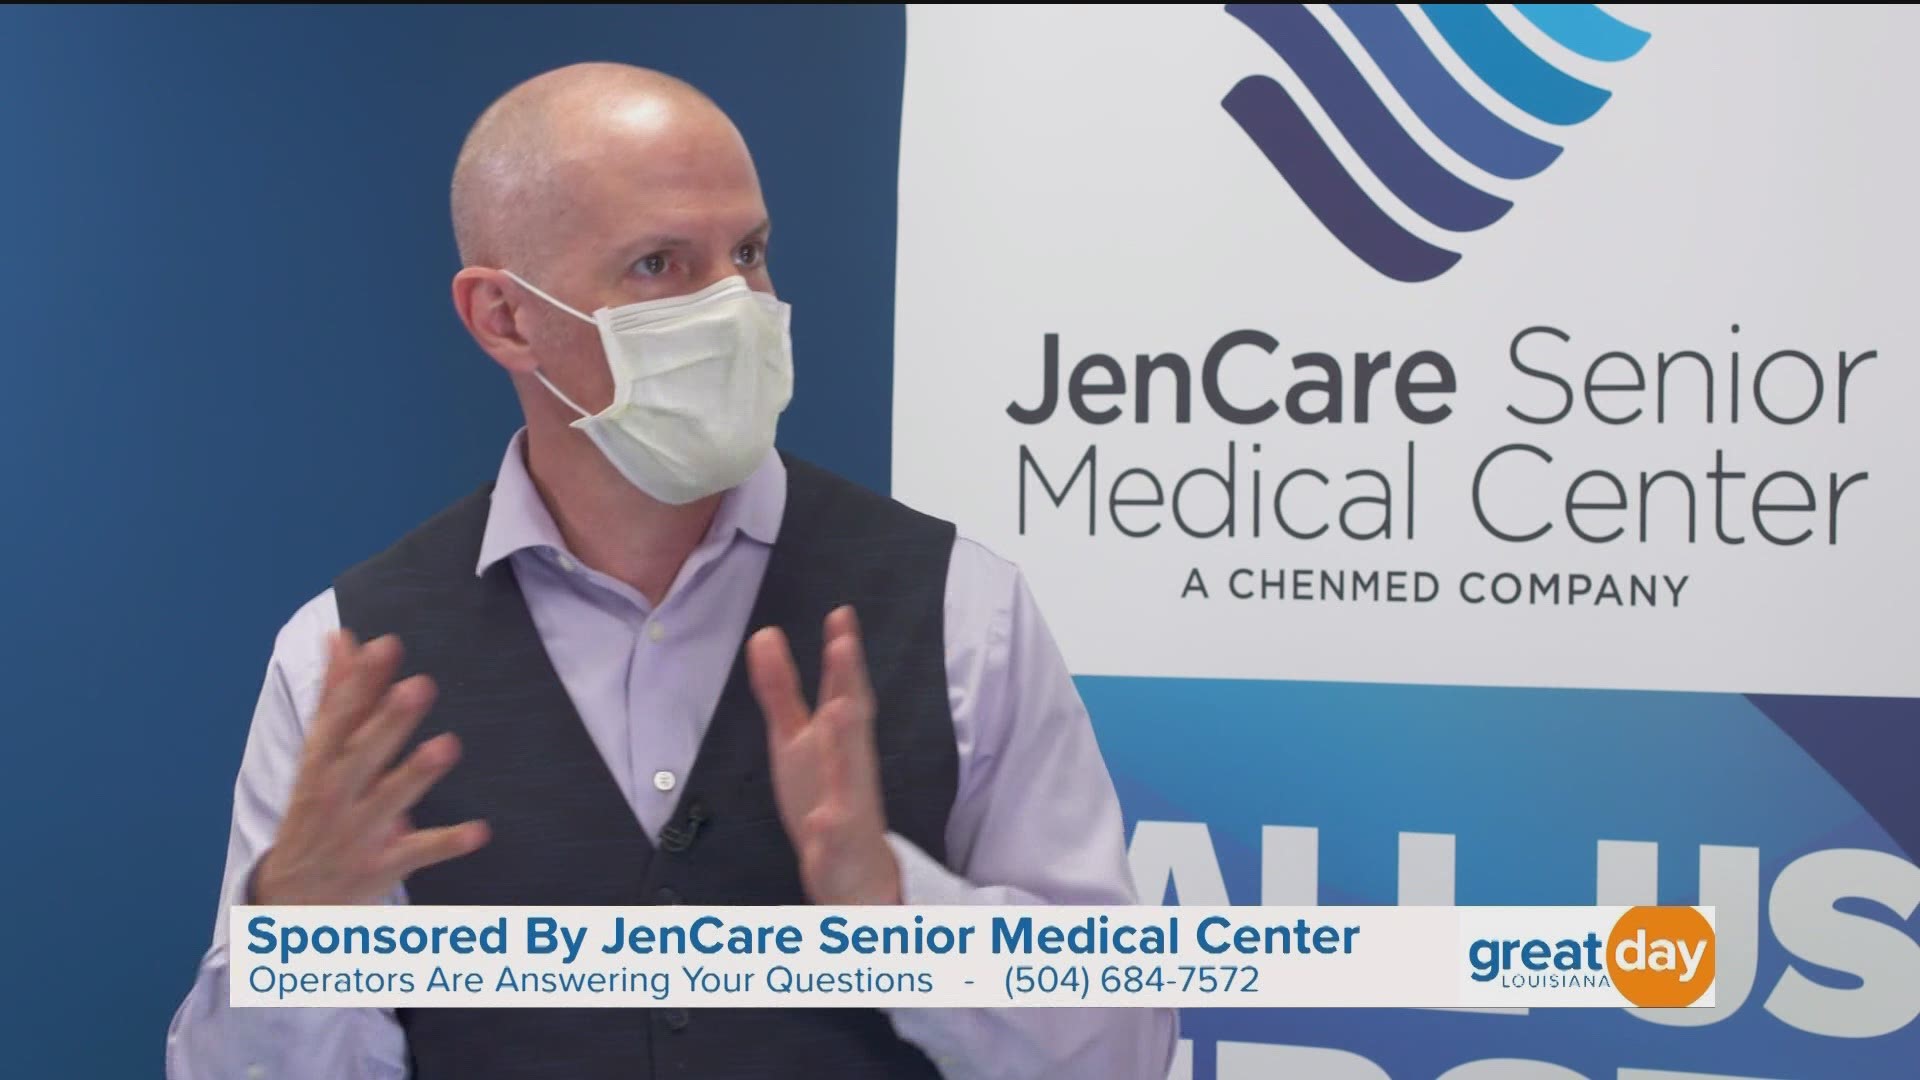 To have your questions answered, call JenCare at 504-684-7572. You can also visit, jencaremed.com